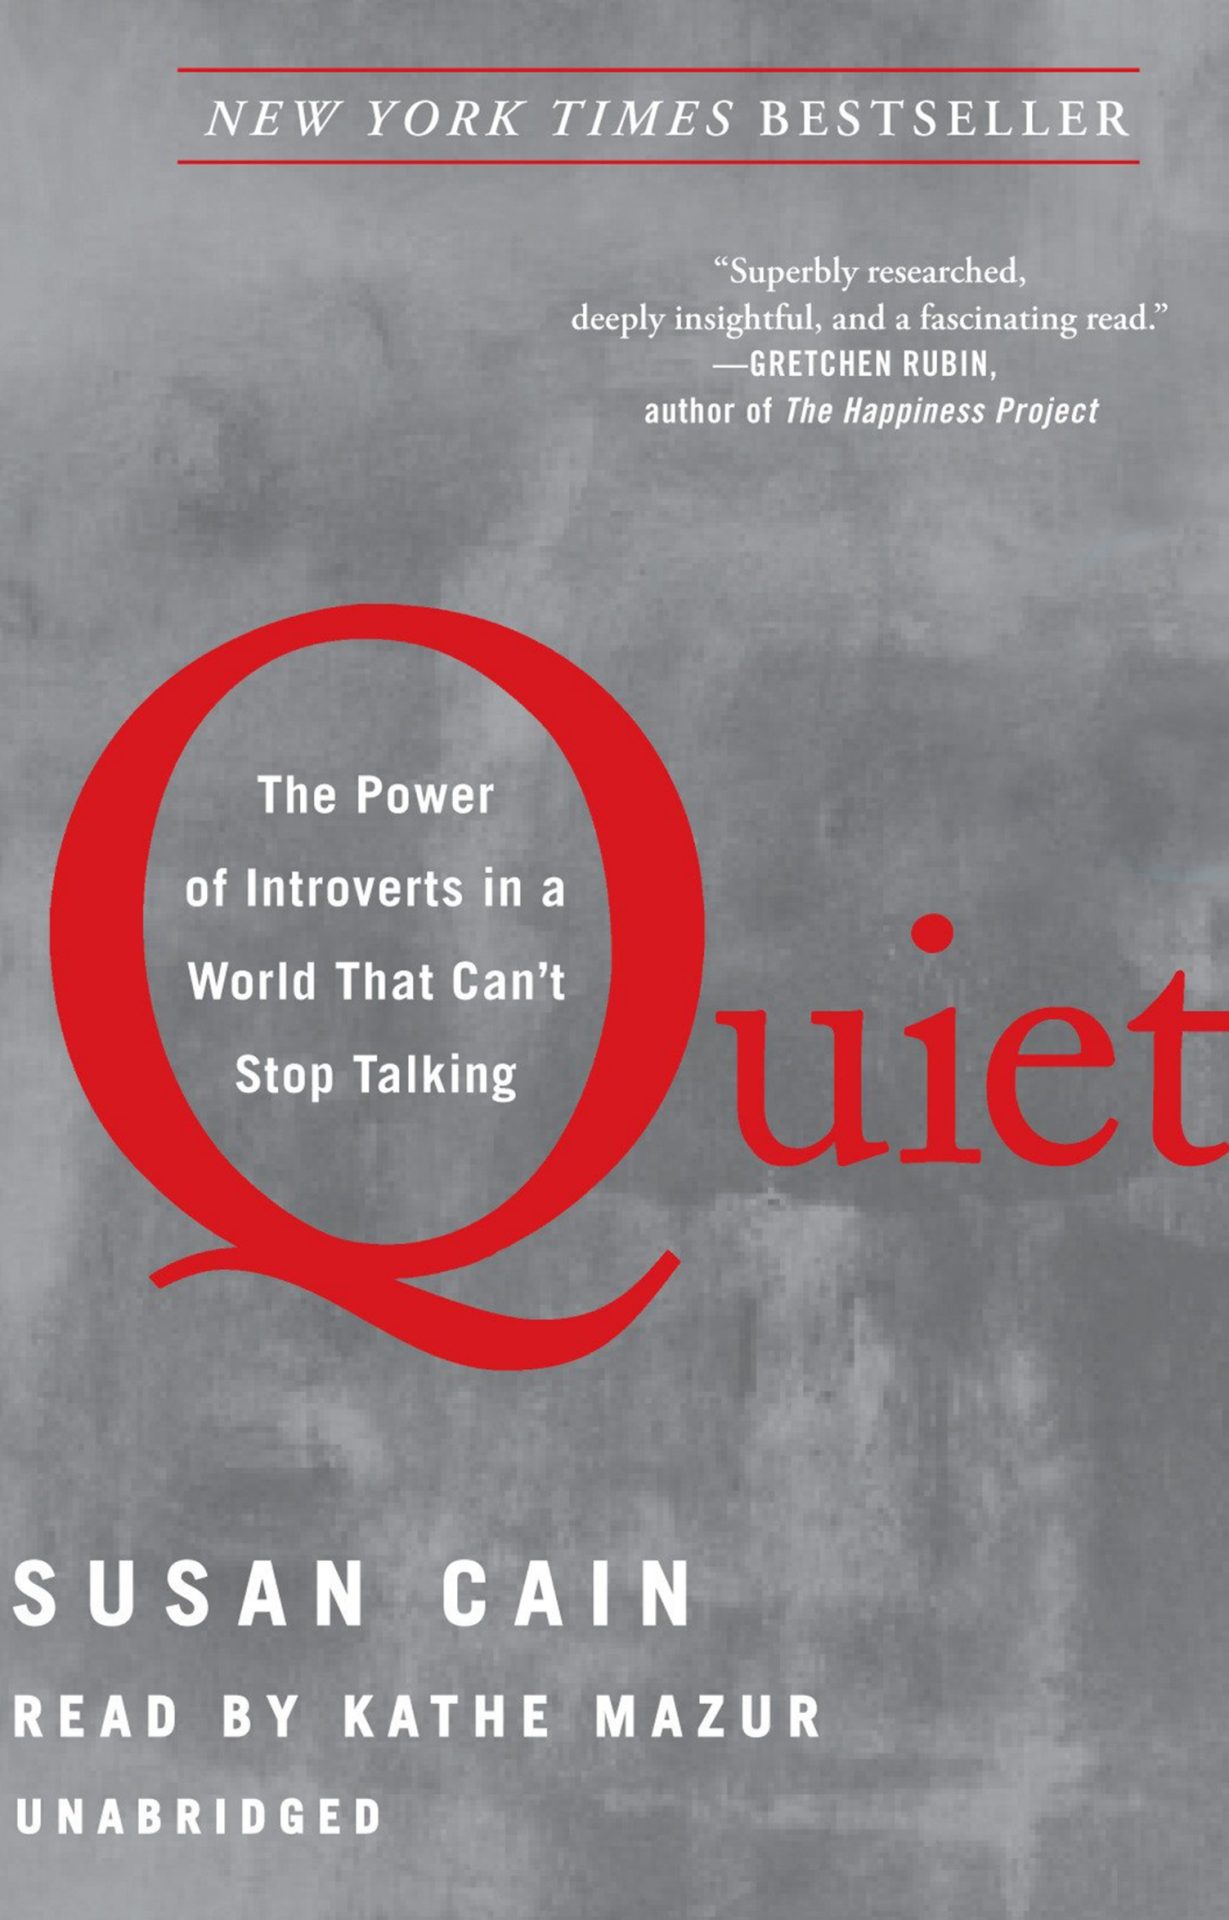 The cover of the book The Power of Silence; The power of introverts in a world that cannot stop talking! – Susan Cain